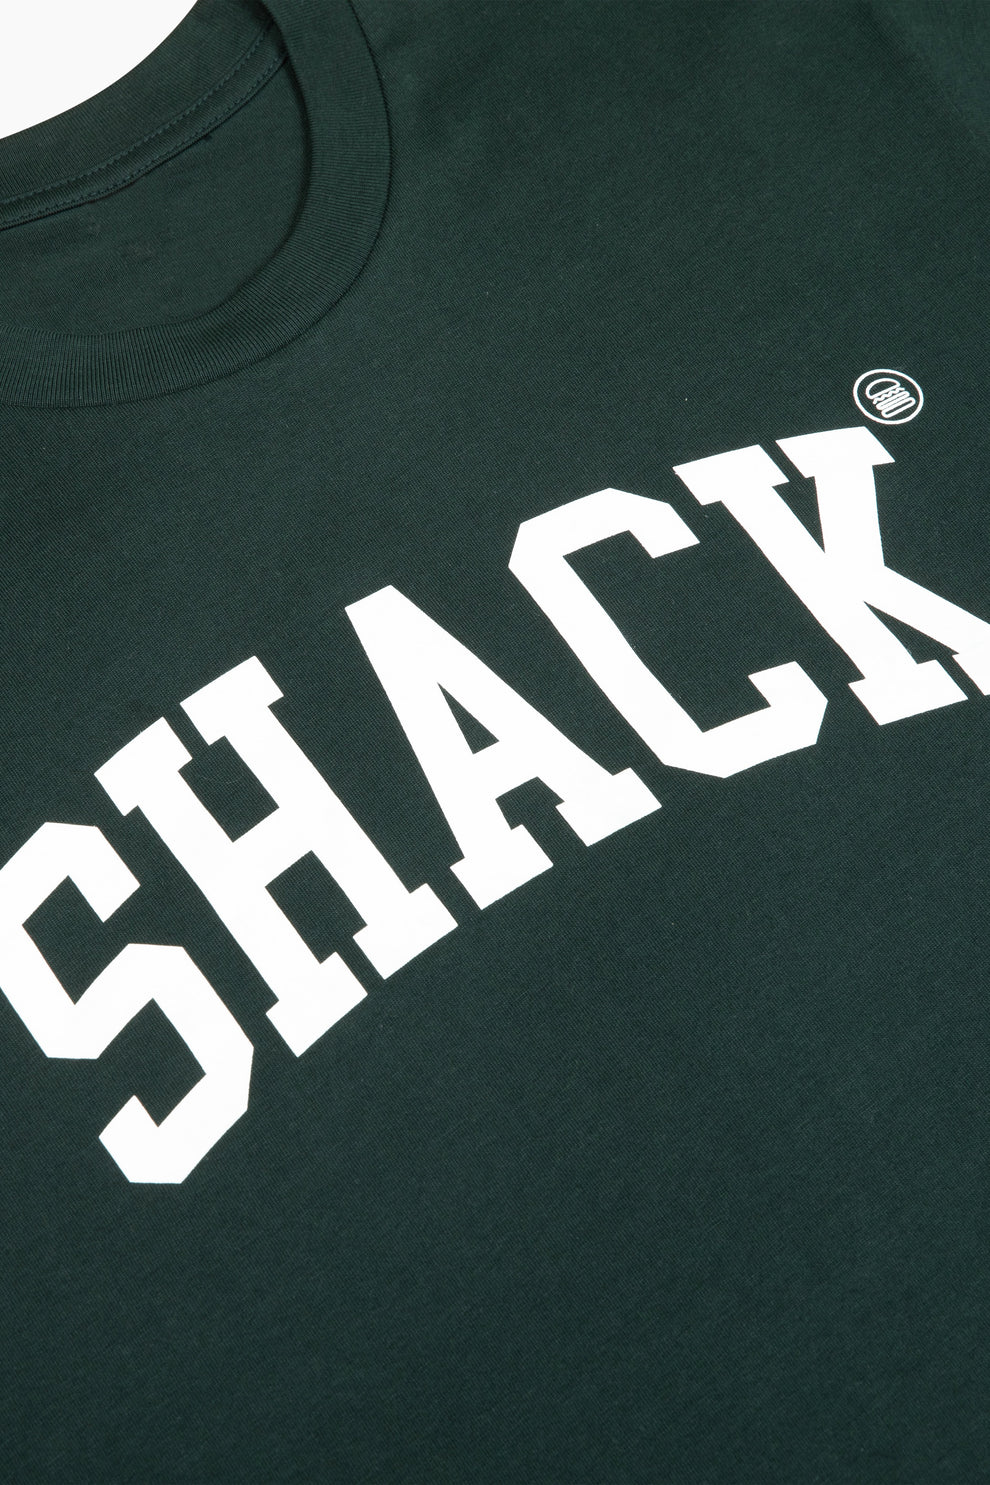 Closeup of the forest green t-shirt with the word "Shack" displayed across the chest